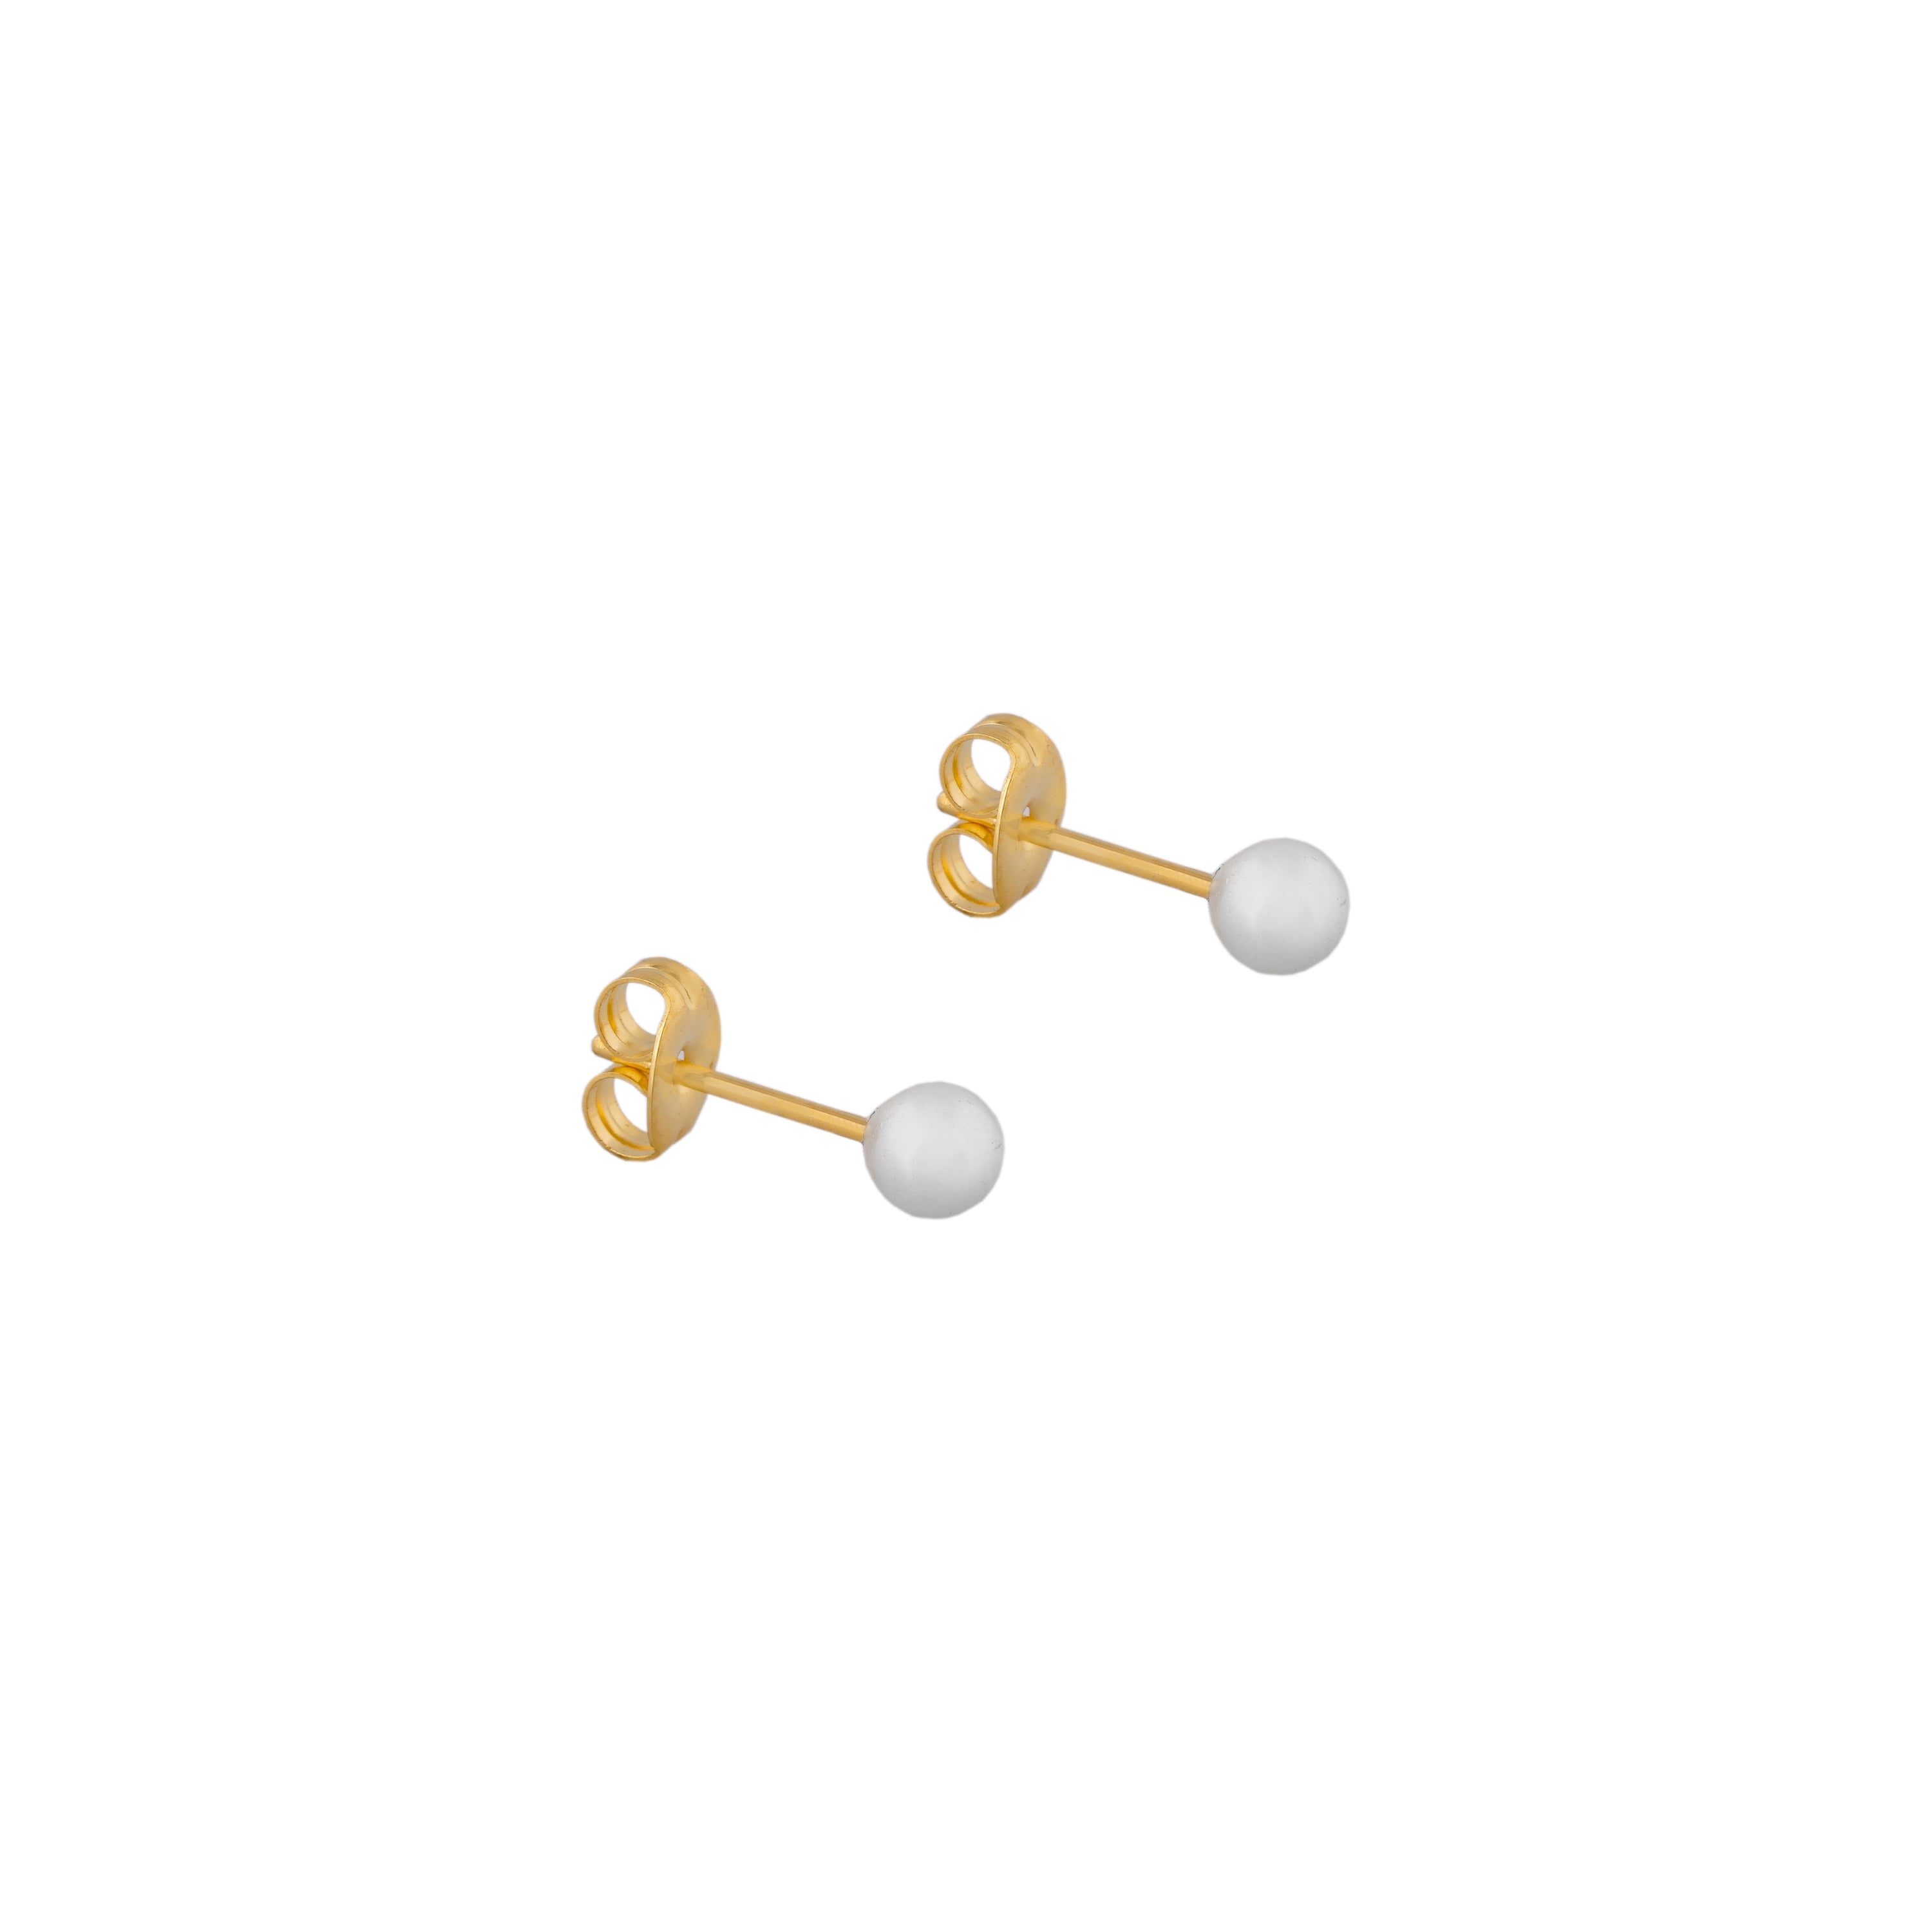 4MM White Pearl 24K Pure Gold Plated Ear Studs | MADE IN USA | Ideal for everyday wear